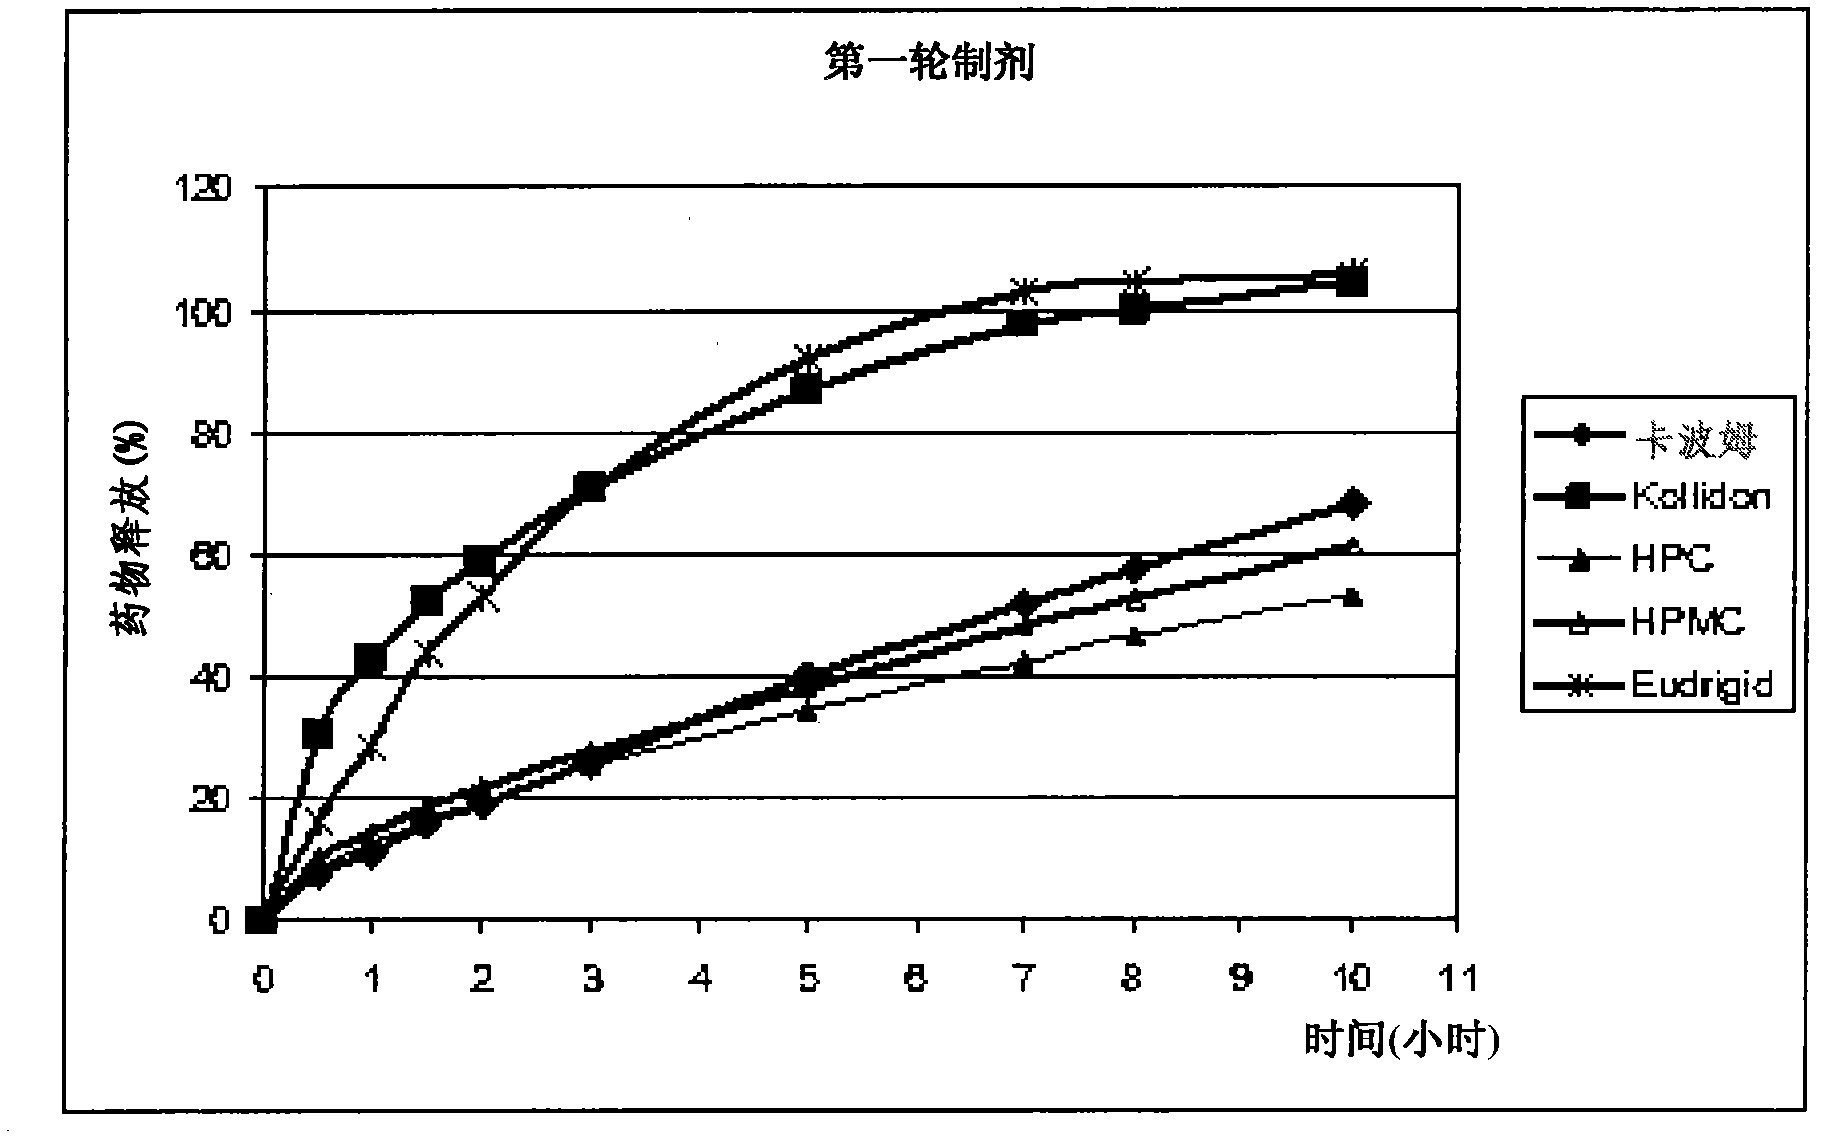 Formulations of 5-fluorocytosine and uses thereof